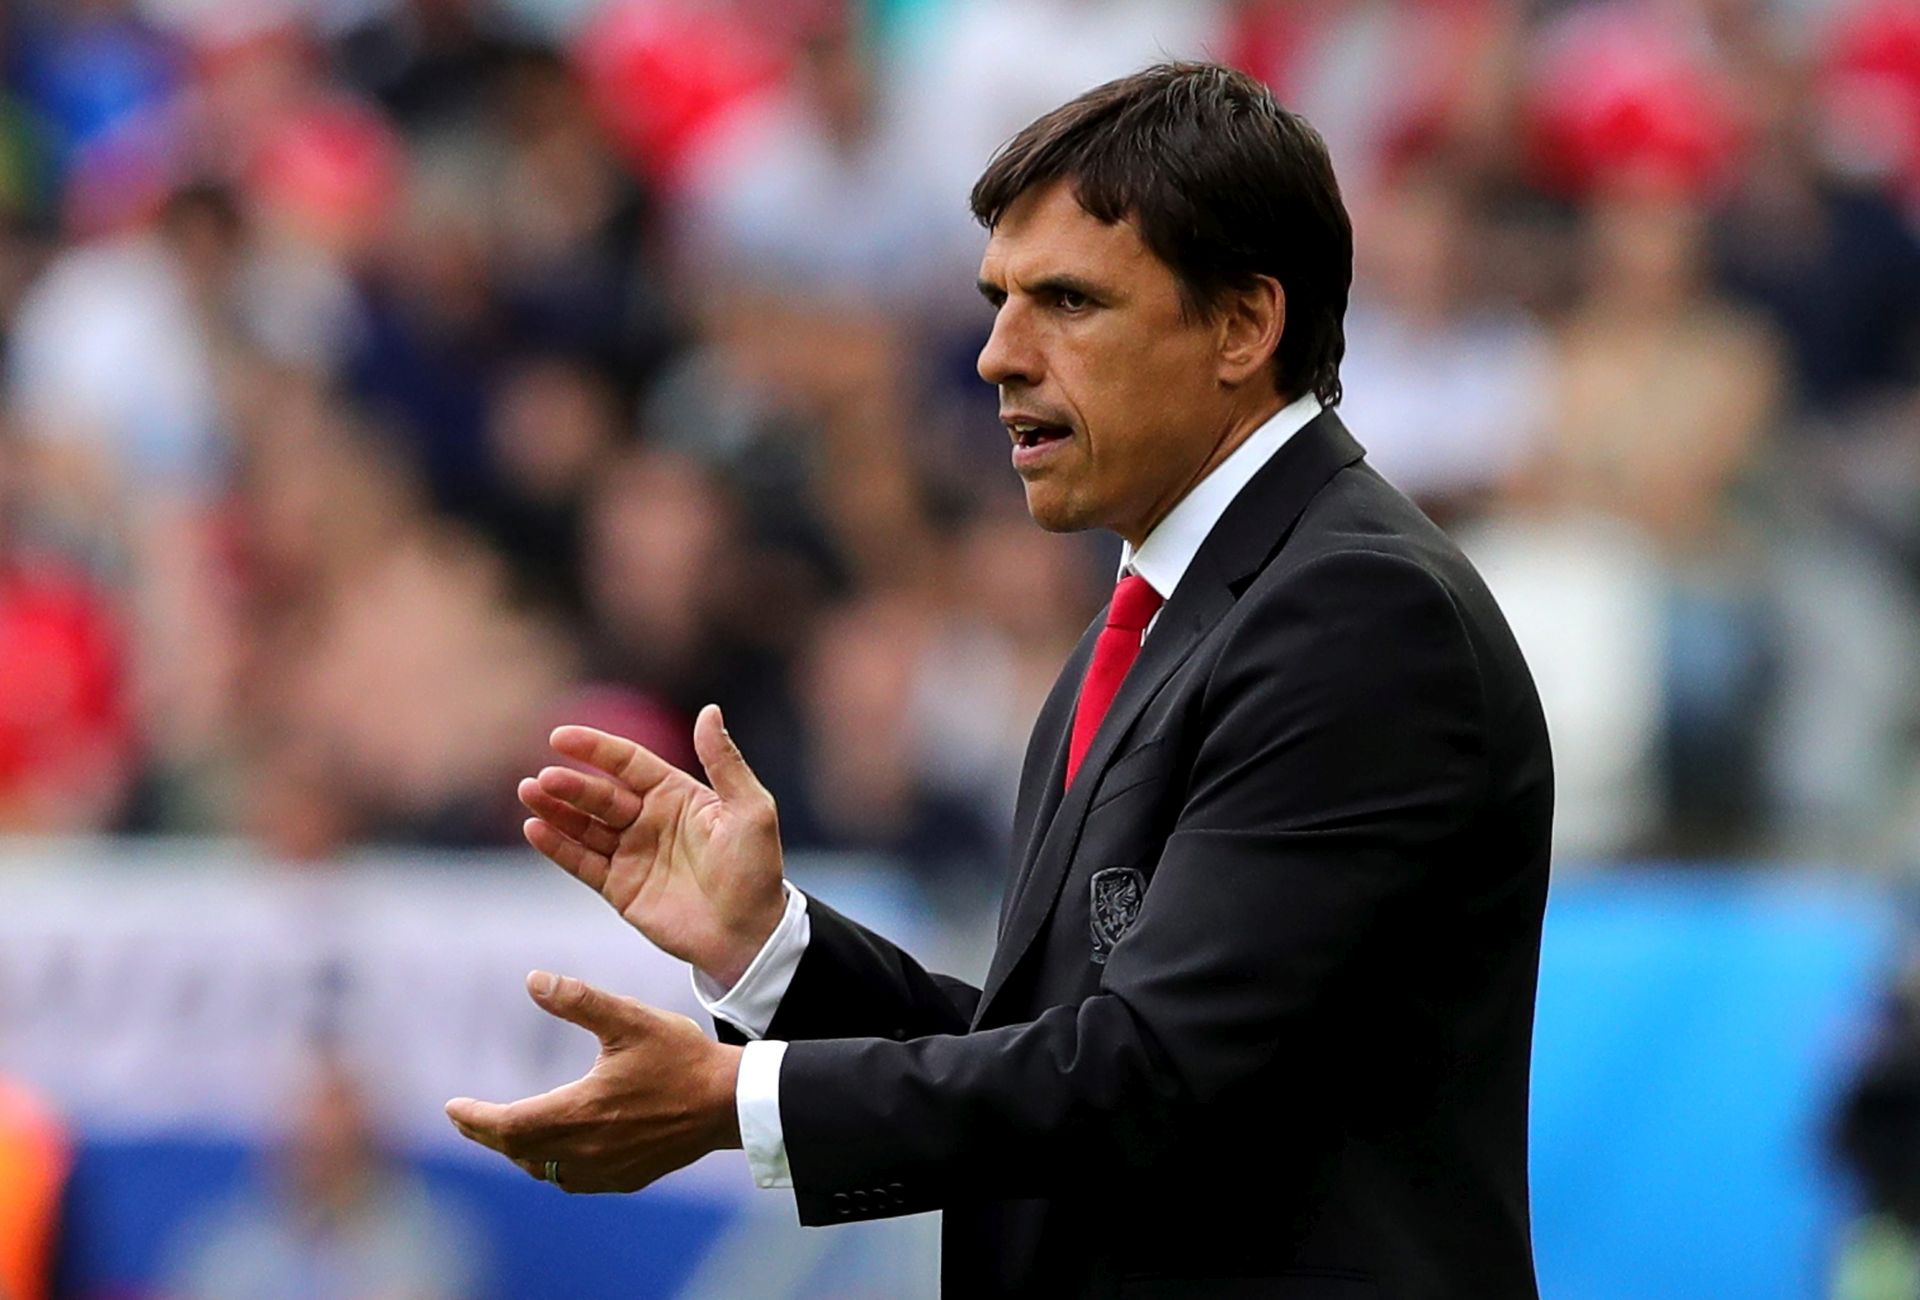 epa05357555 Wales' coach Chris Coleman in action during the UEFA EURO 2016 group B preliminary round match between Wales and Slovakia at Stade de Bordeaux in Bordeaux, France, 11 June 2016.

(RESTRICTIONS APPLY: For editorial news reporting purposes only. Not used for commercial or marketing purposes without prior written approval of UEFA. Images must appear as still images and must not emulate match action video footage. Photographs published in online publications (whether via the Internet or otherwise) shall have an interval of at least 20 seconds between the posting.)  EPA/ARMANDO BABANI   EDITORIAL USE ONLY